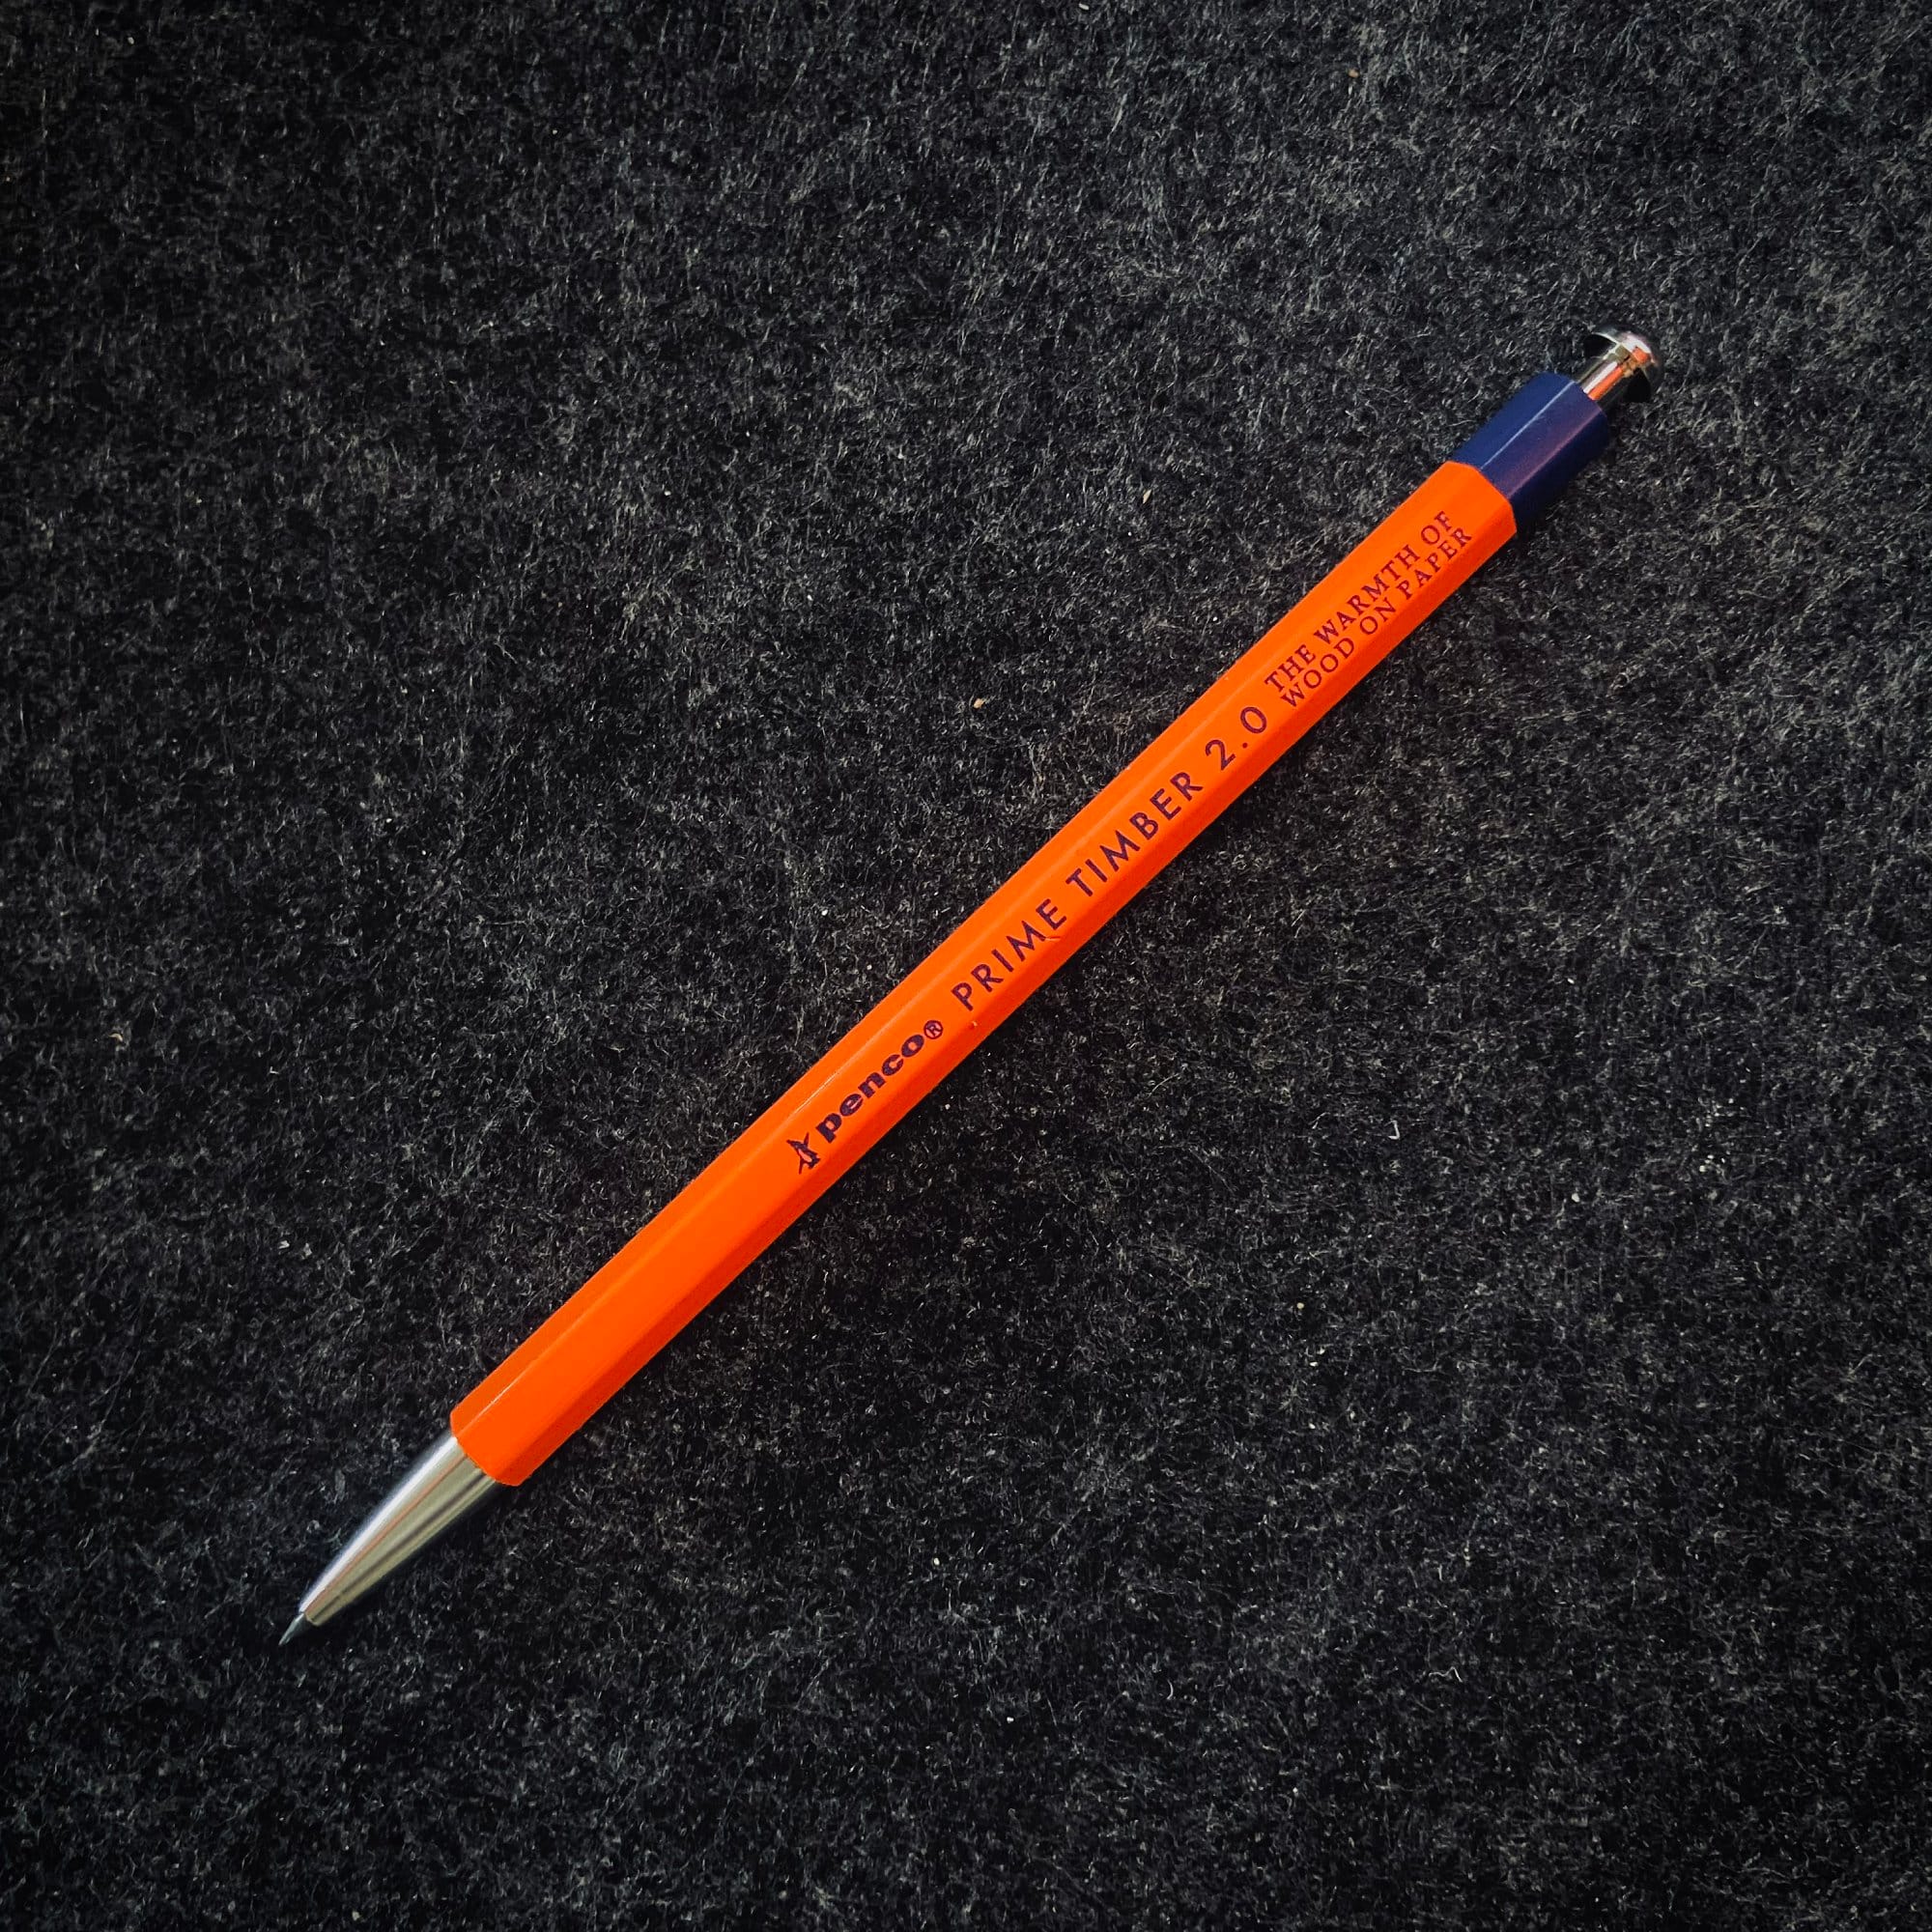 An orange mechanical pencil with text labelling it as “Prime Timber 2.0“ resting on a dark felt surface